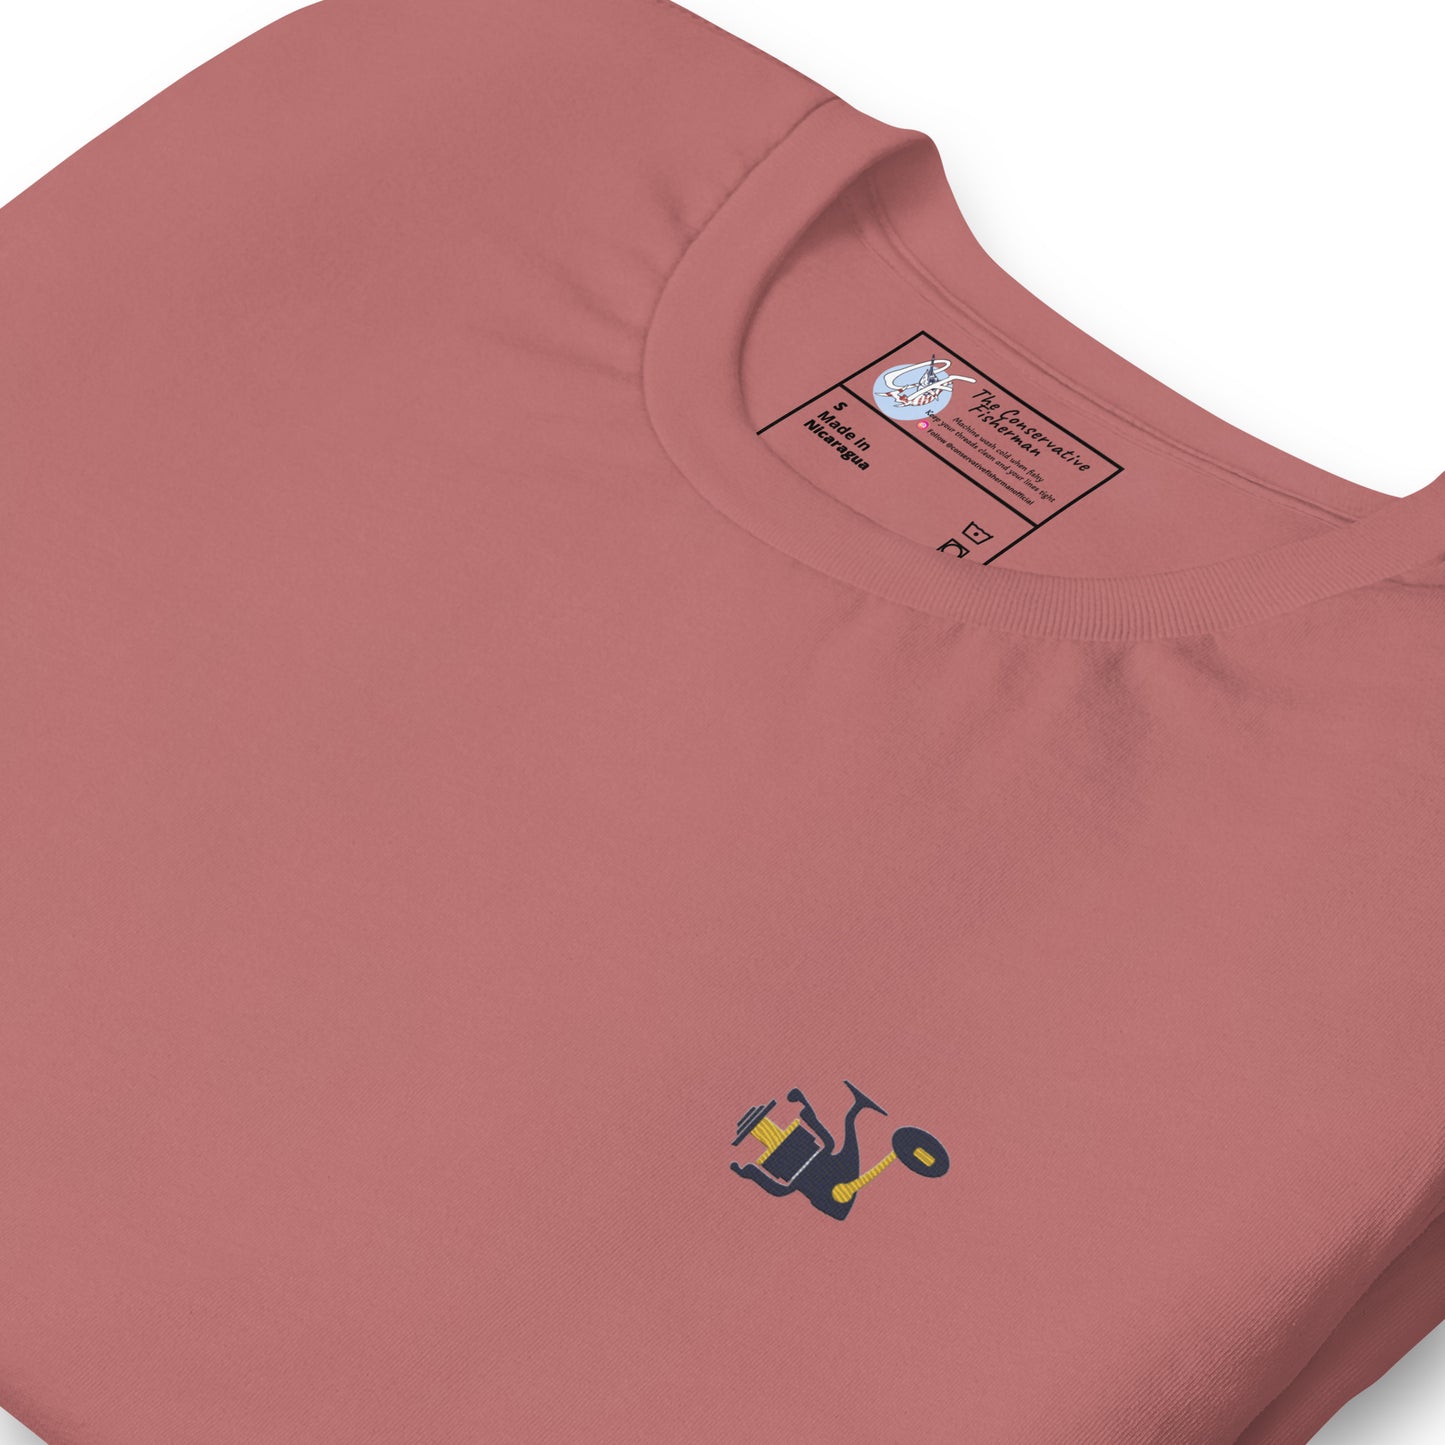 'Spinning Reel' Premium Embroidered Shirt